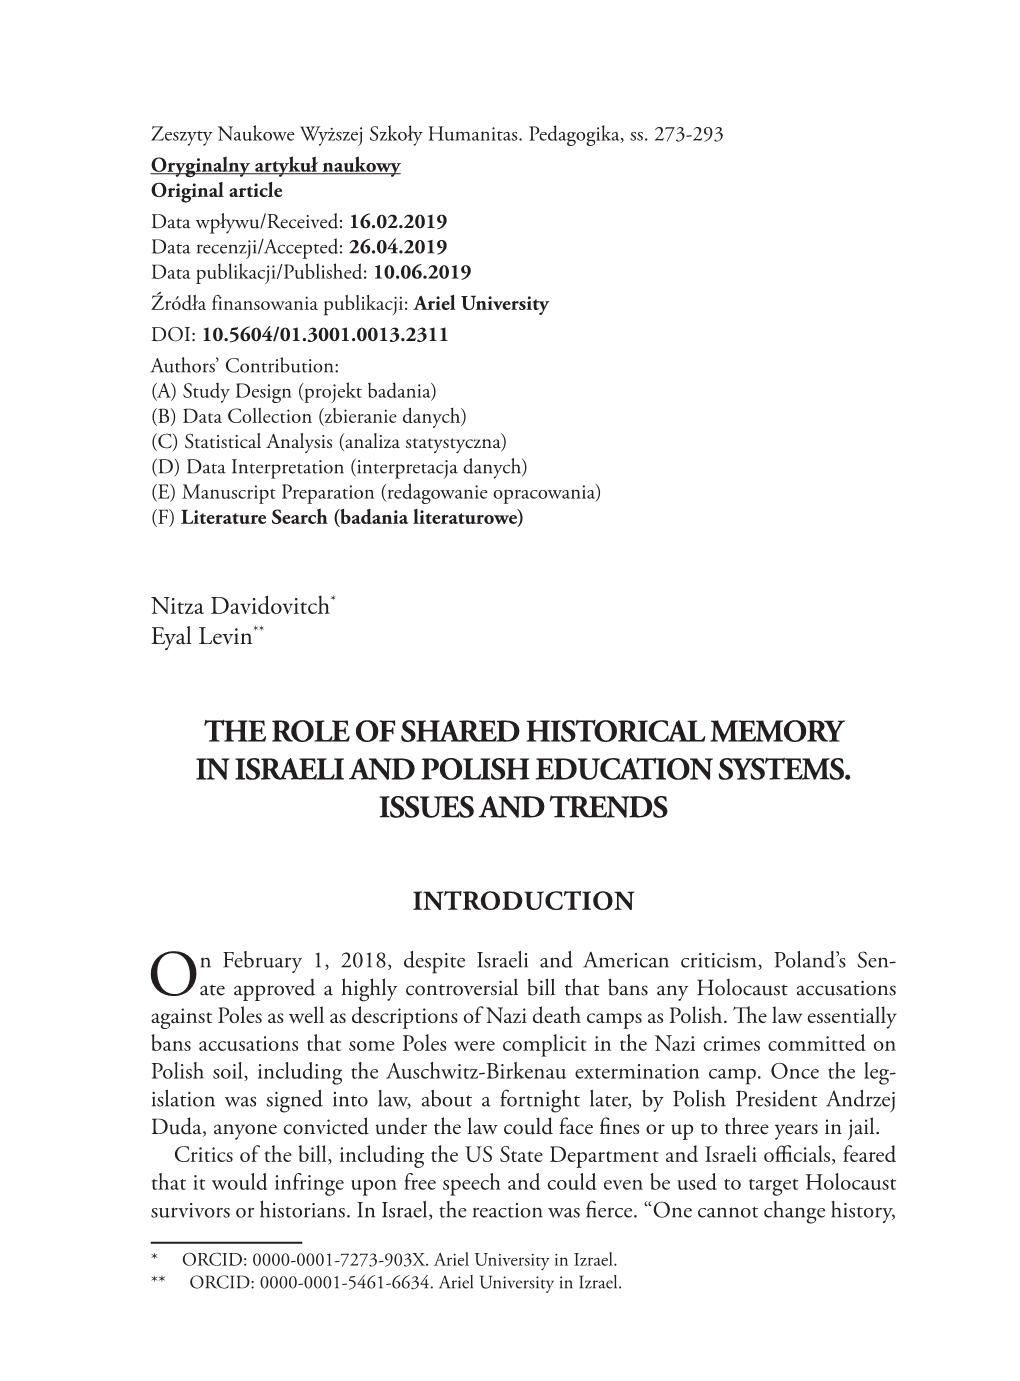 The Role of Shared Historical Memory in Israeli and Polish Education Systems. Issues and Trends